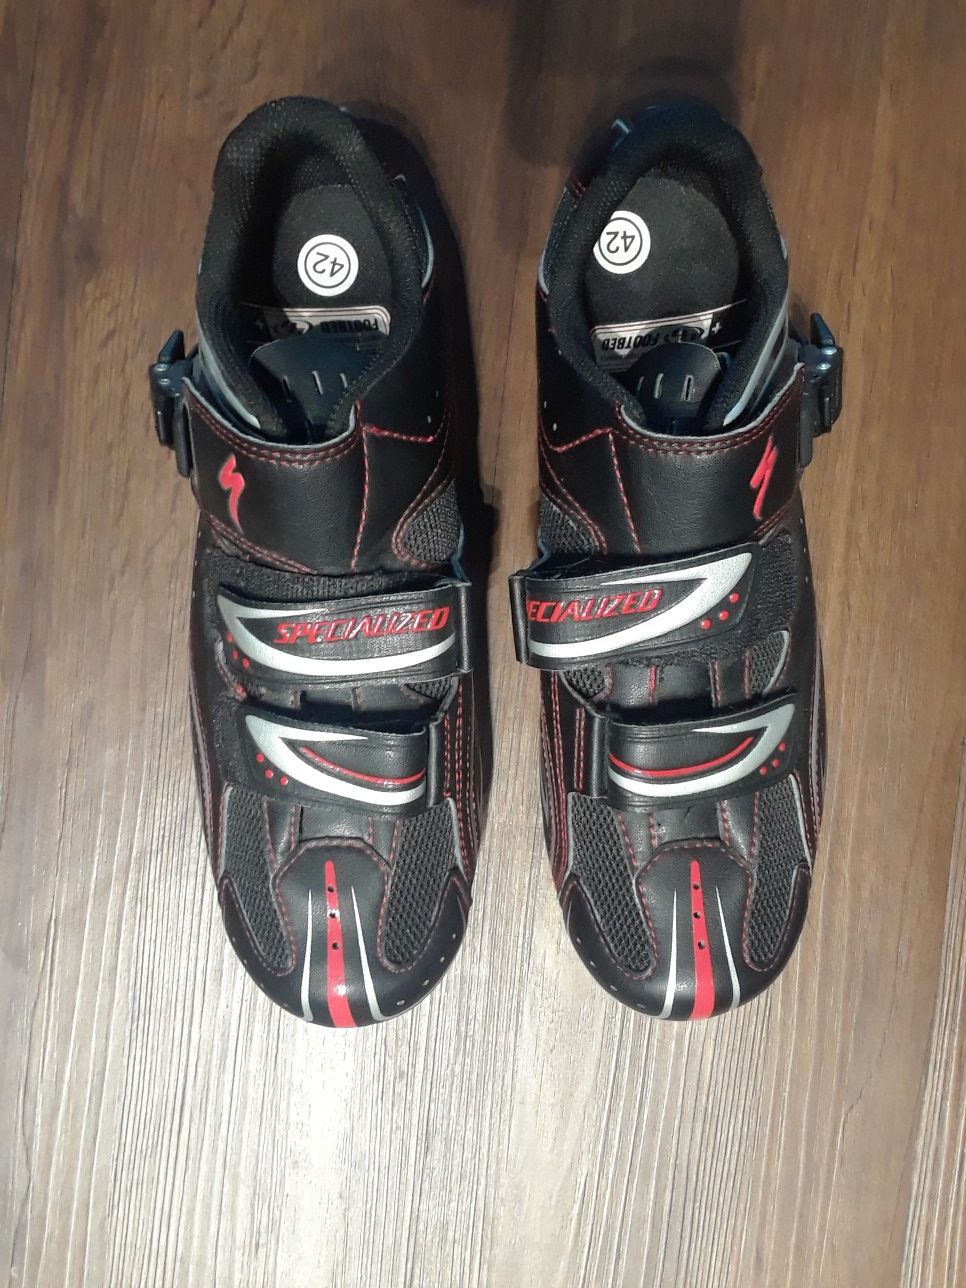 Specialized 69 Road Bike Shoes Size 42